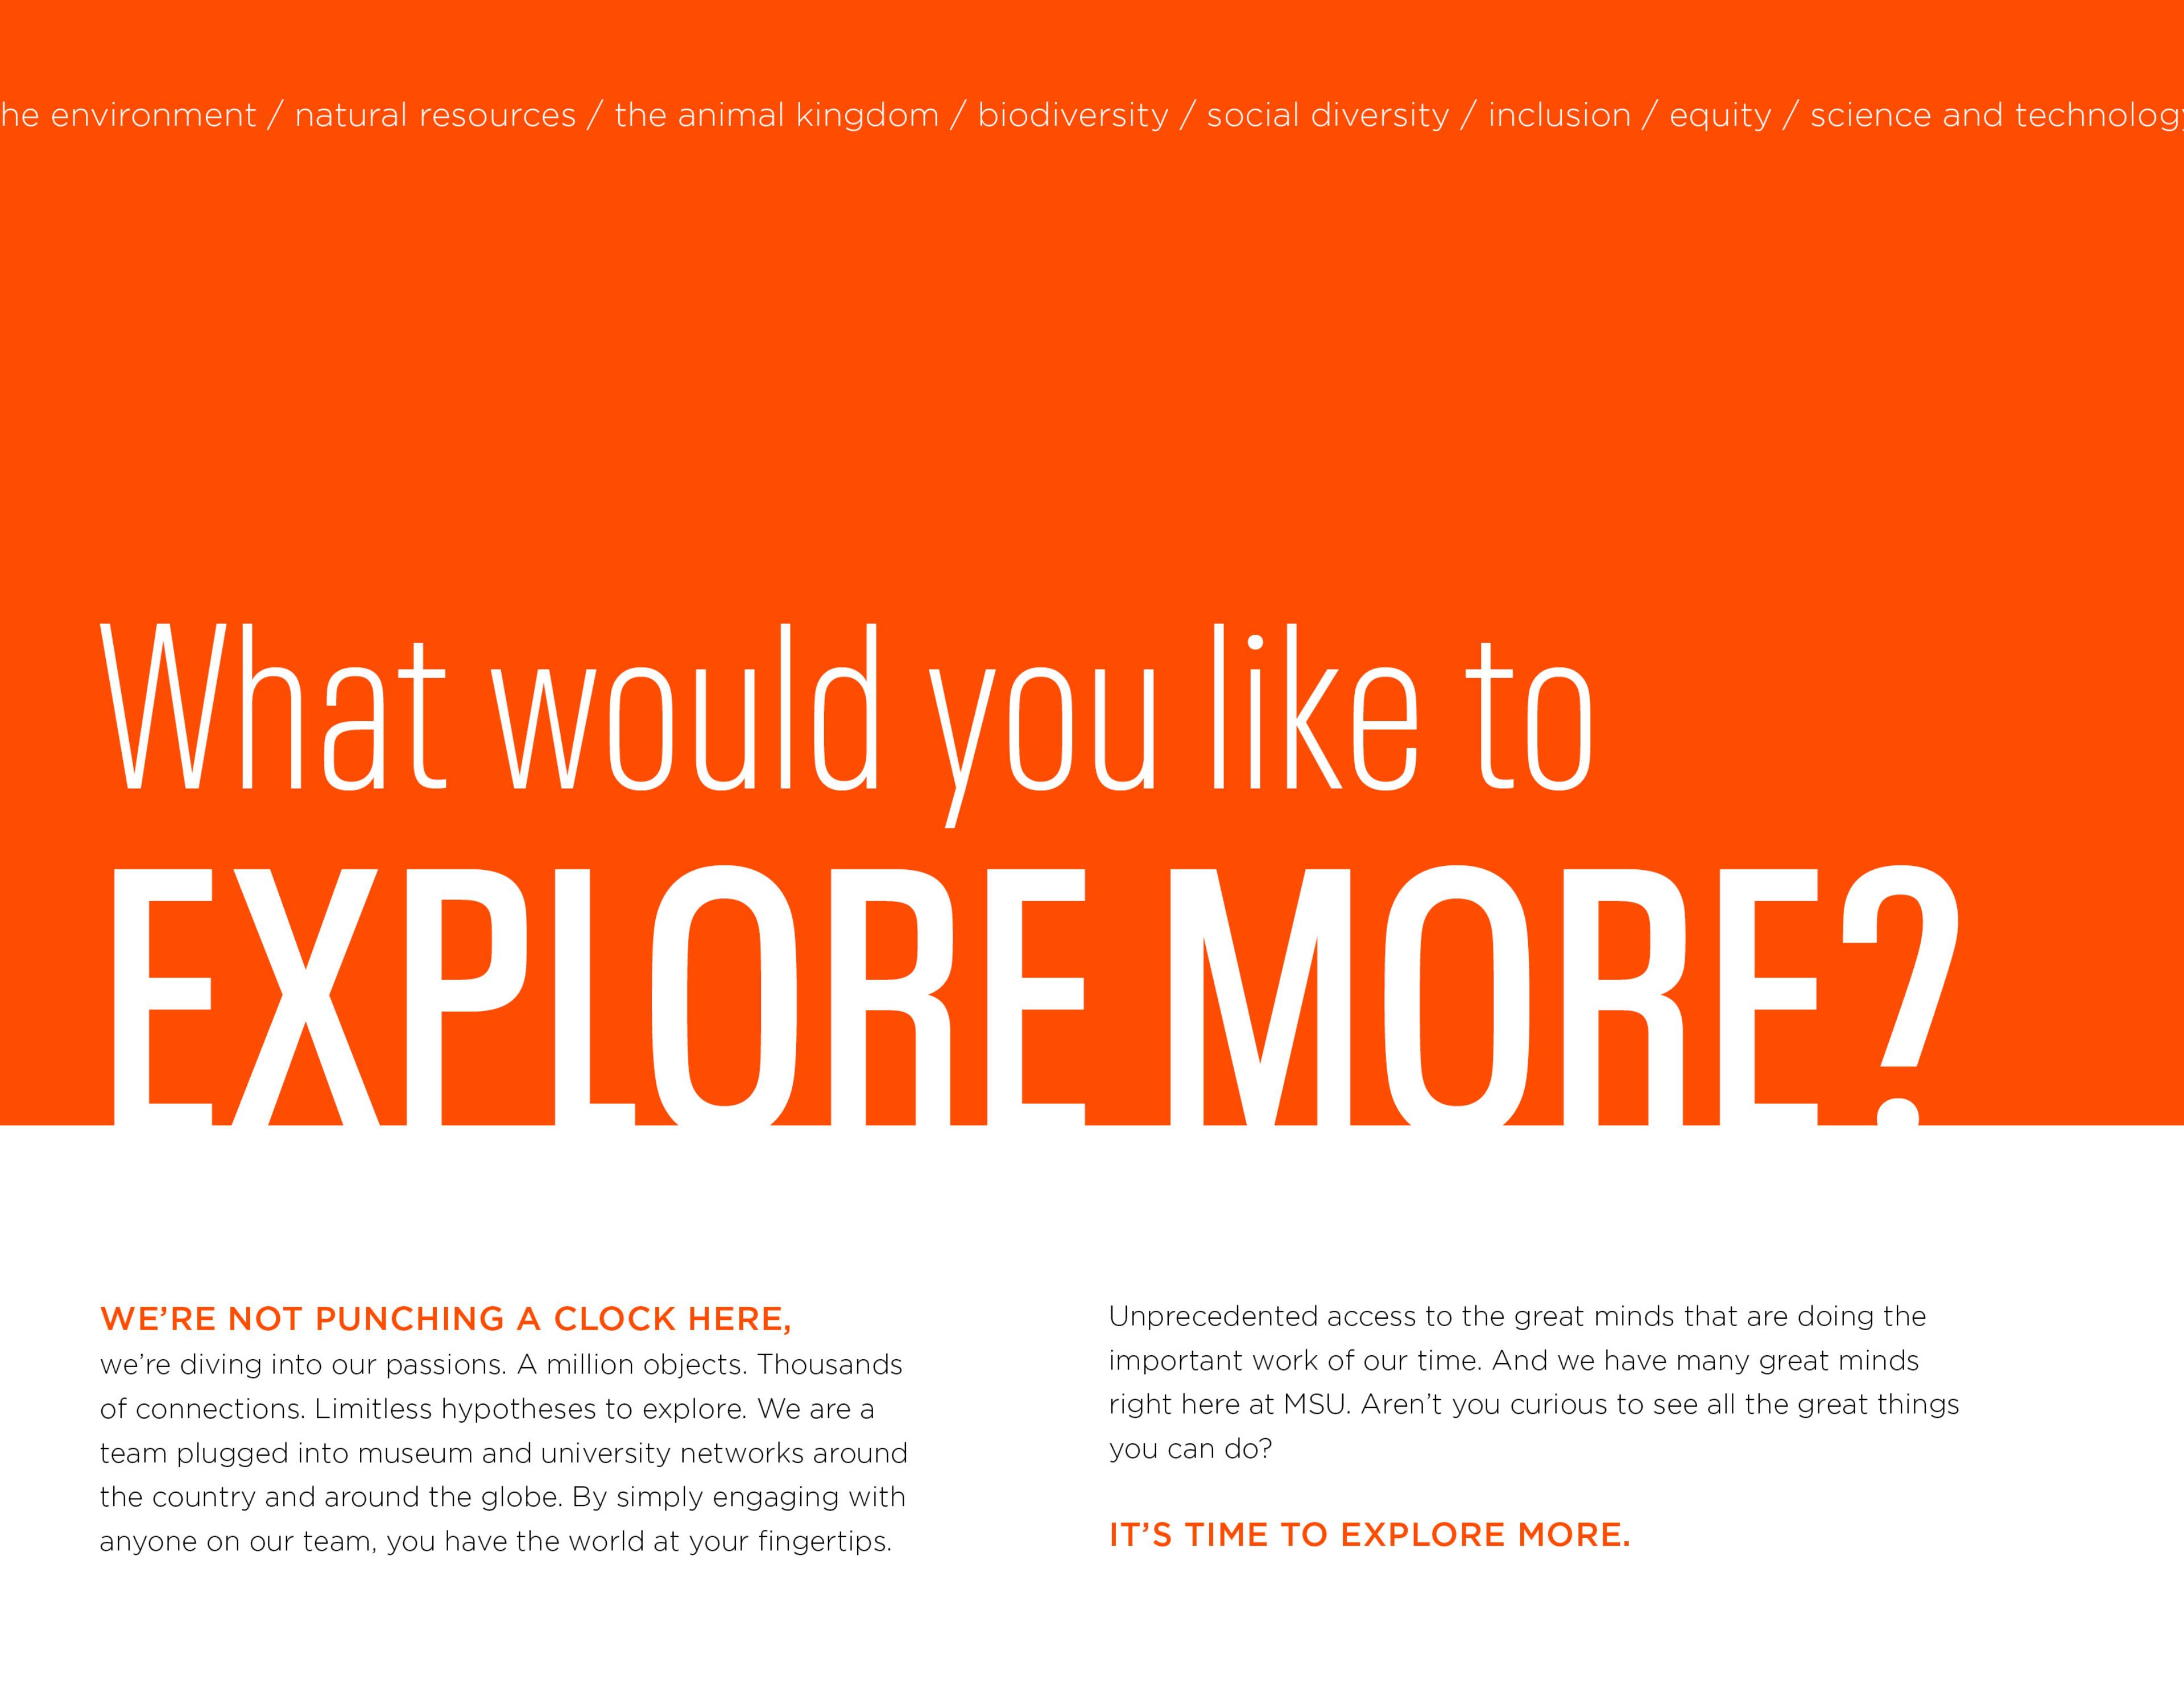 a page from the identity guide - 'What would you like to explore more?'